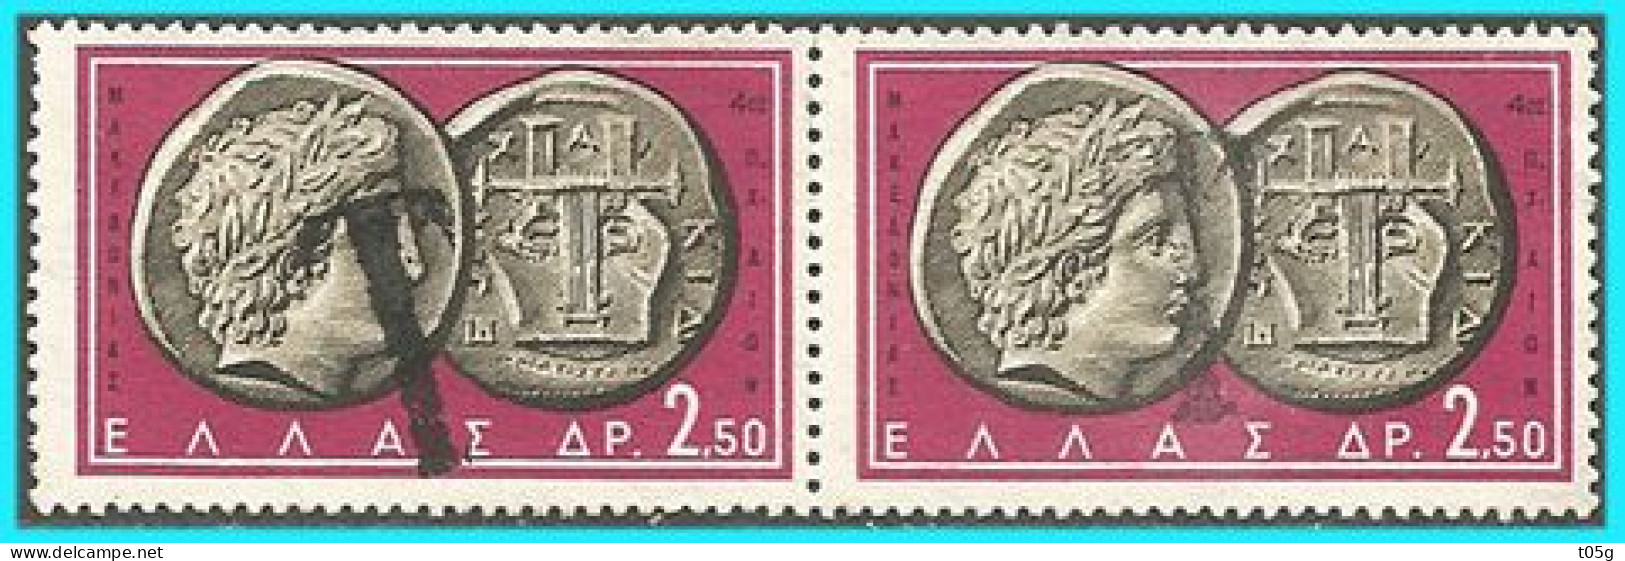 GREECE- GRECE- HELLAS 1959: Canc (T= ΕΙΣΠΡΑΚΤΕΟΝ ΤΕΛΟΣ)   on  2,50drx  "Ancient Greek Coins  A"  Used - Used Stamps